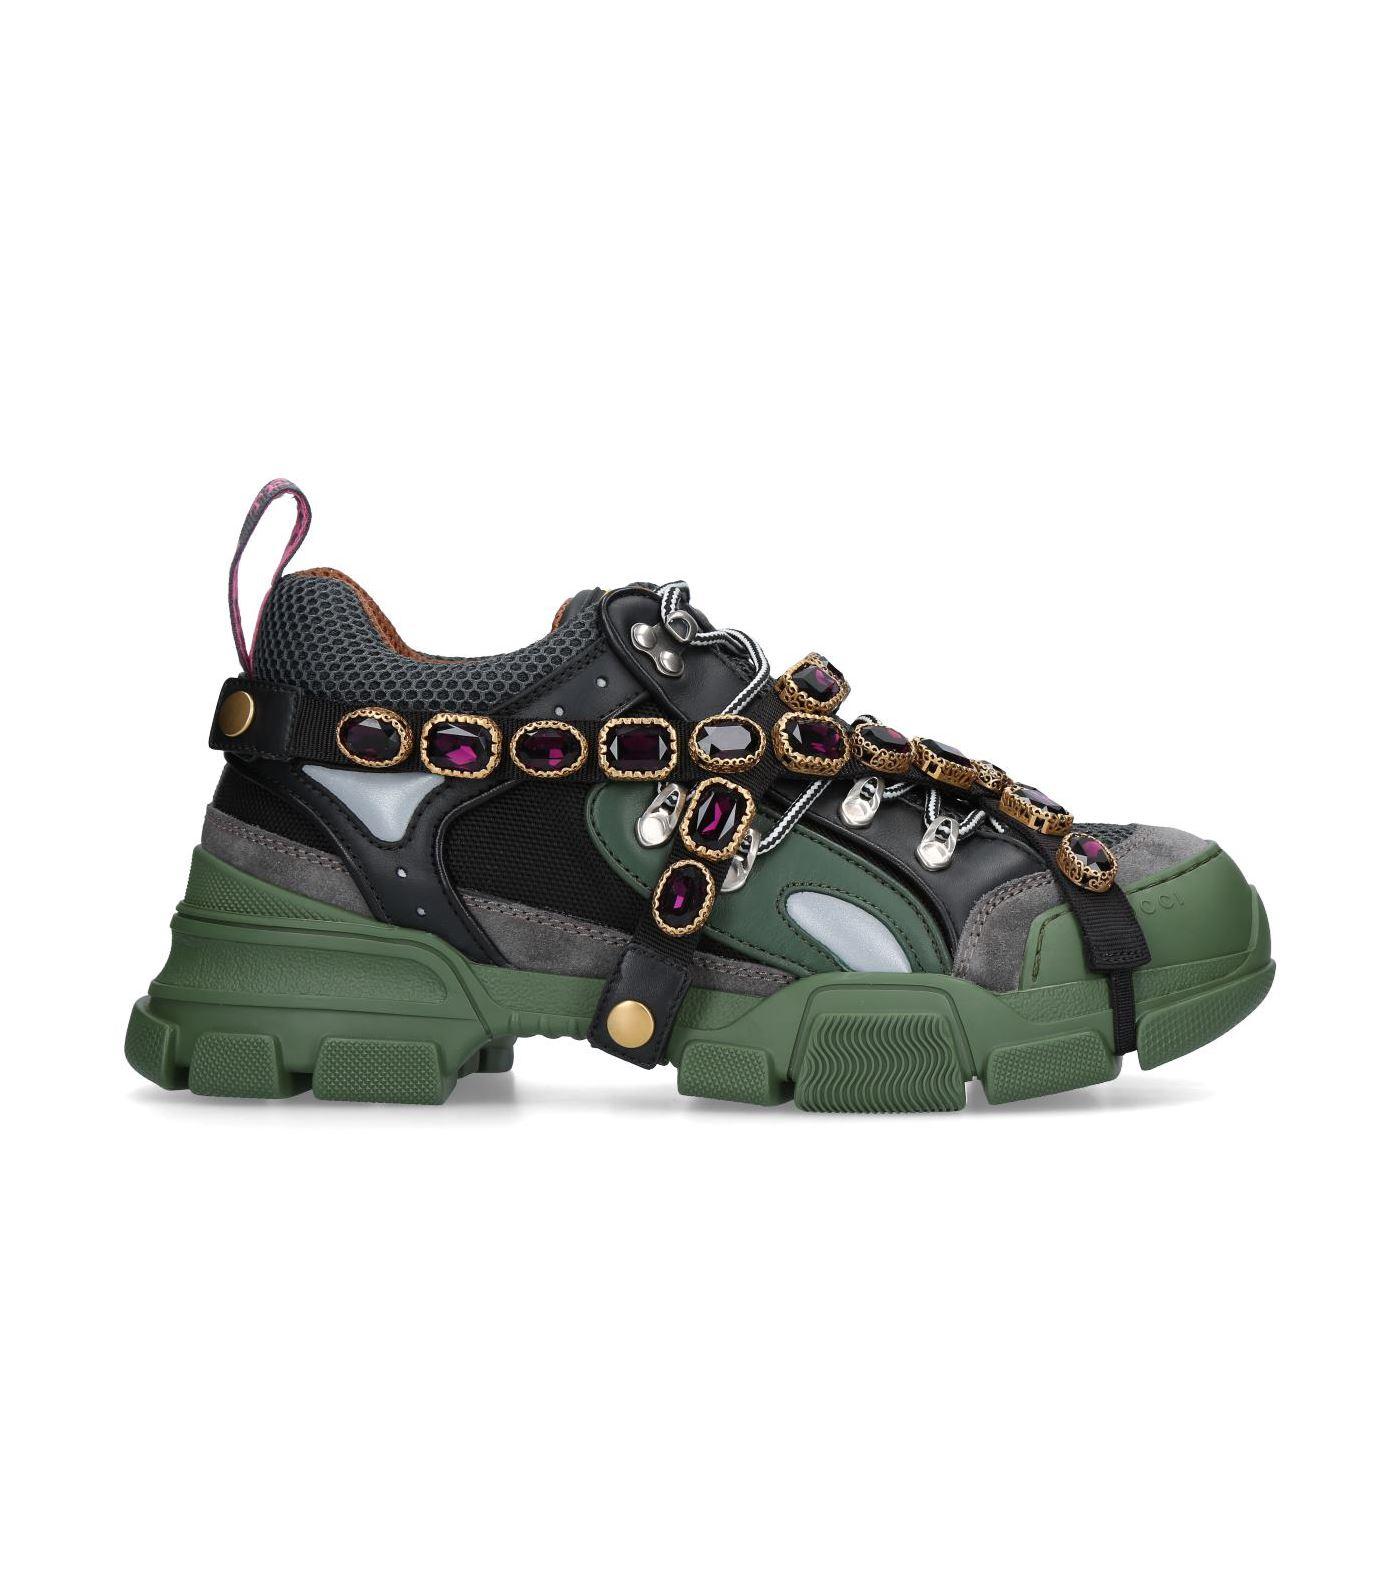 Gucci Flashtrek Embellished Suede, Leather And Mesh Sneakers in Green ...